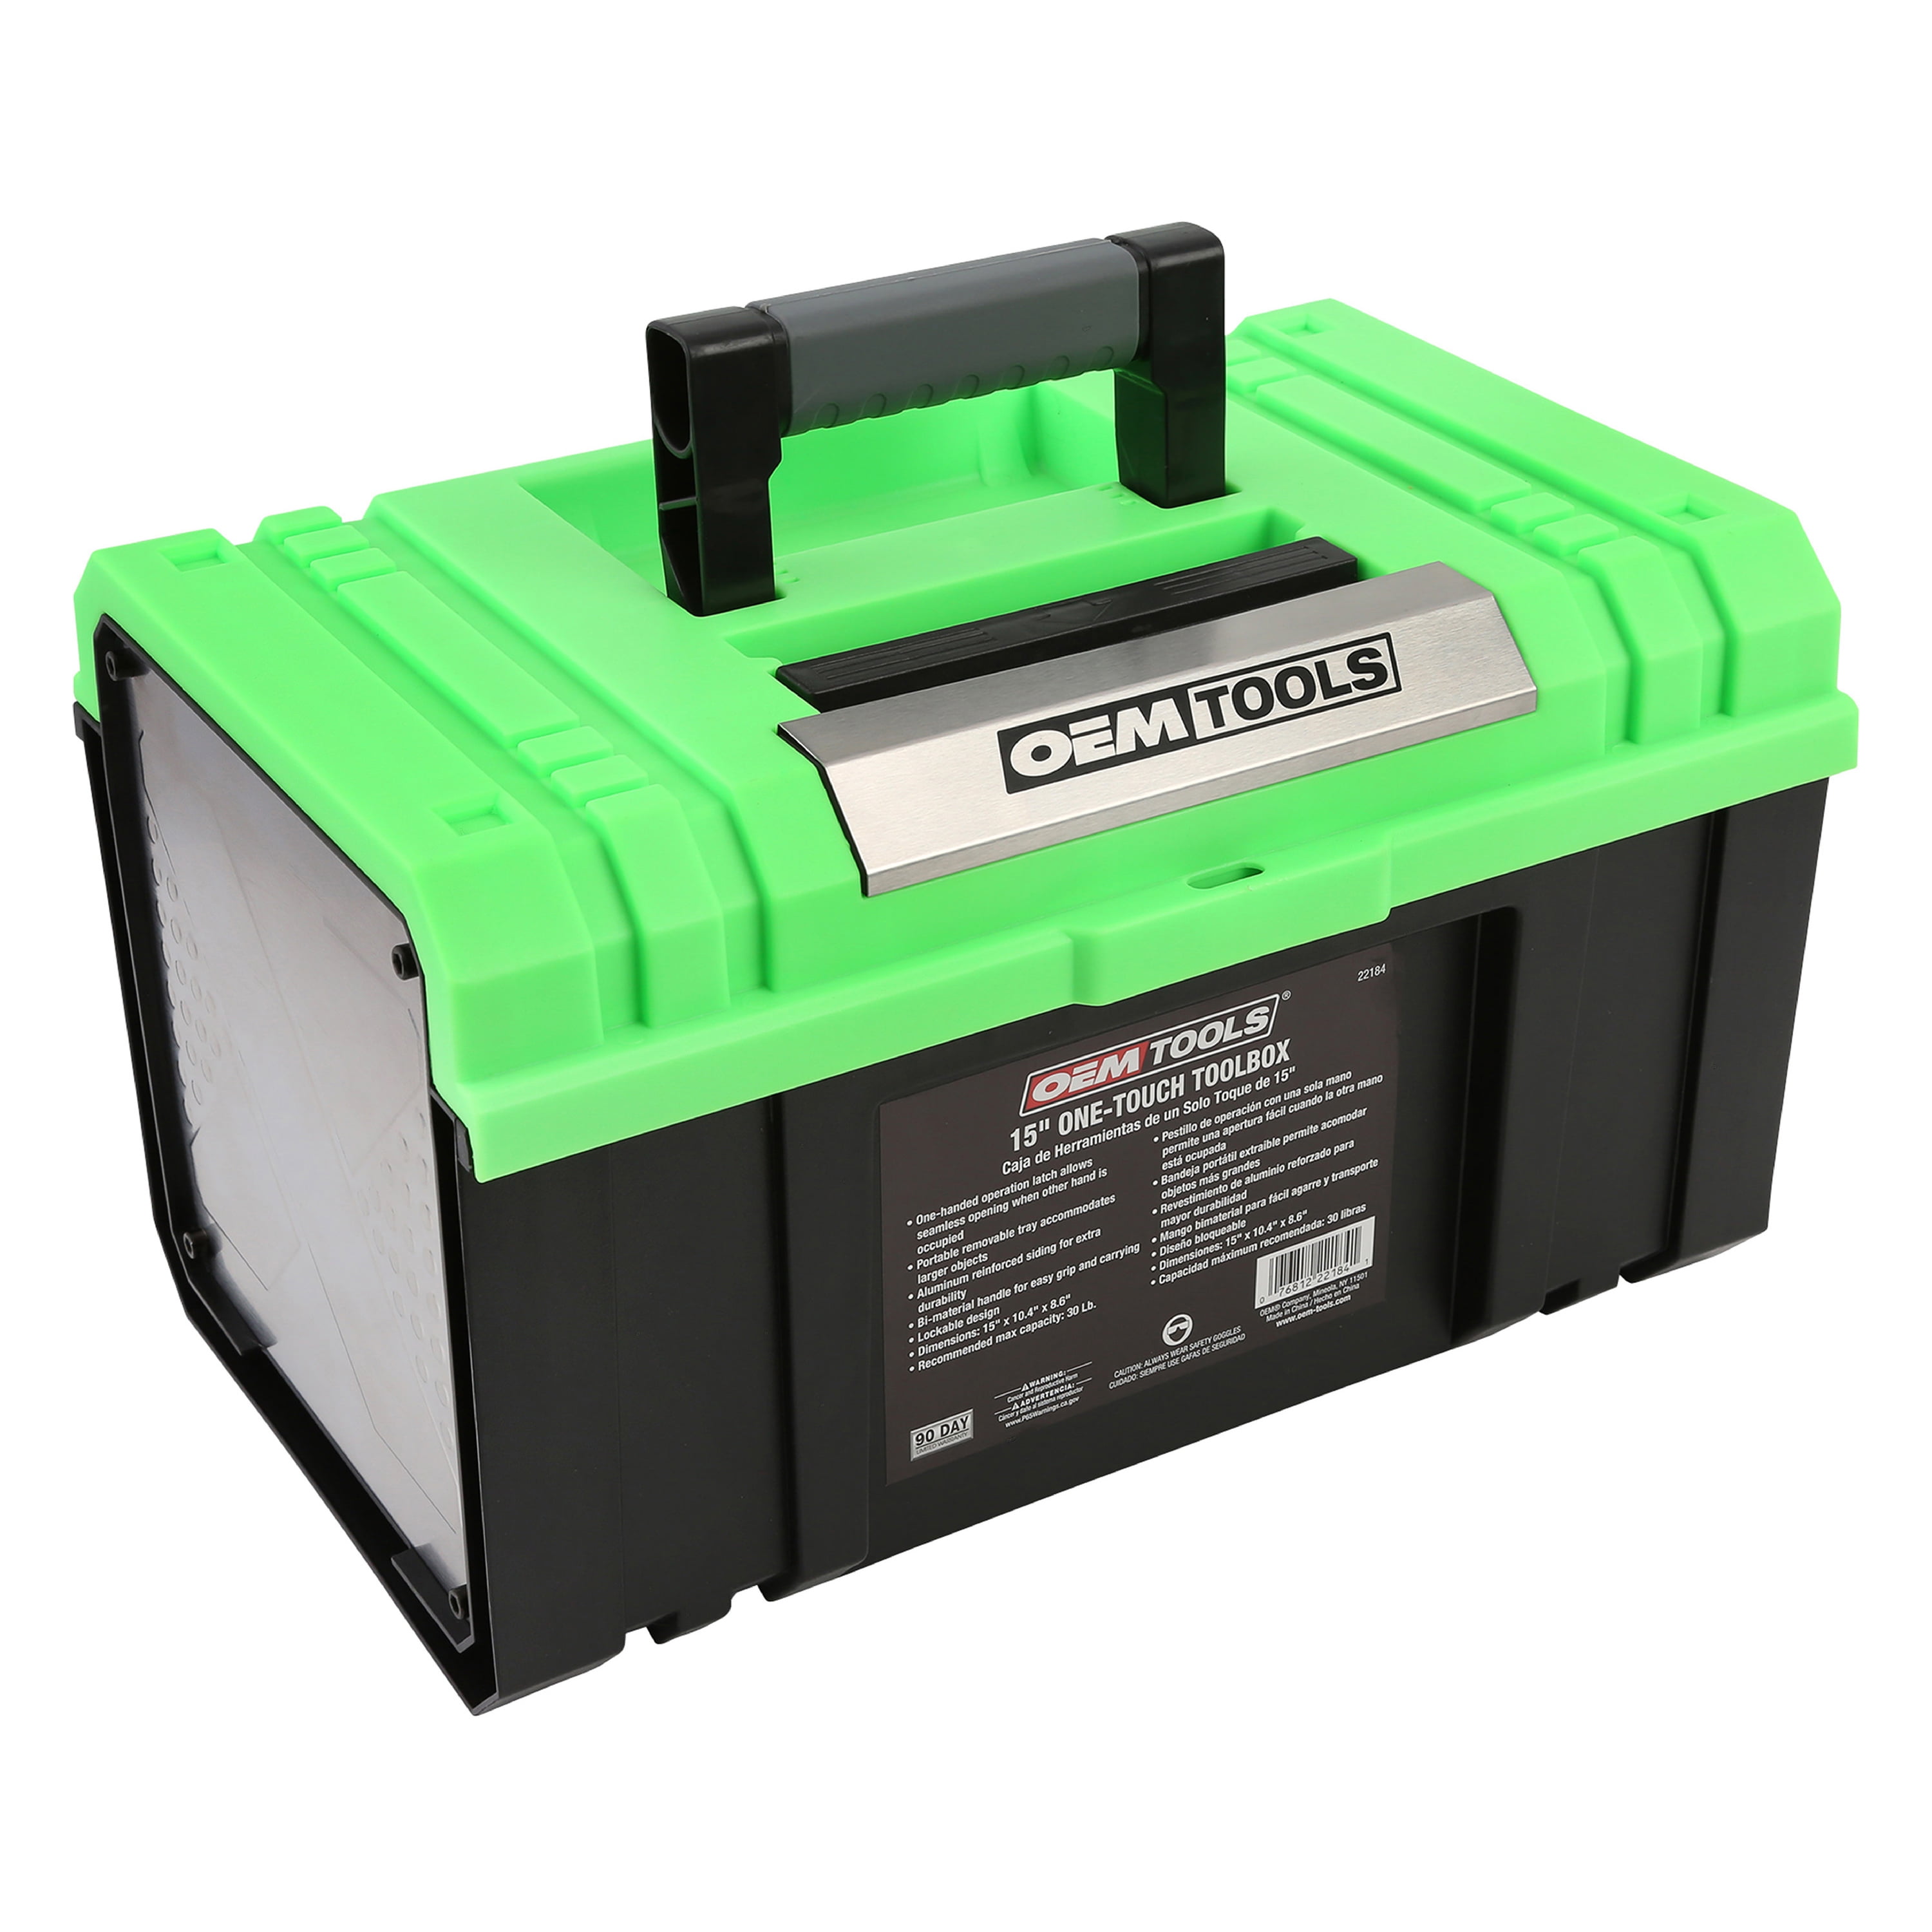 OEMTOOLS 15-Inch One-Touch Tool Box, Green, 22184 